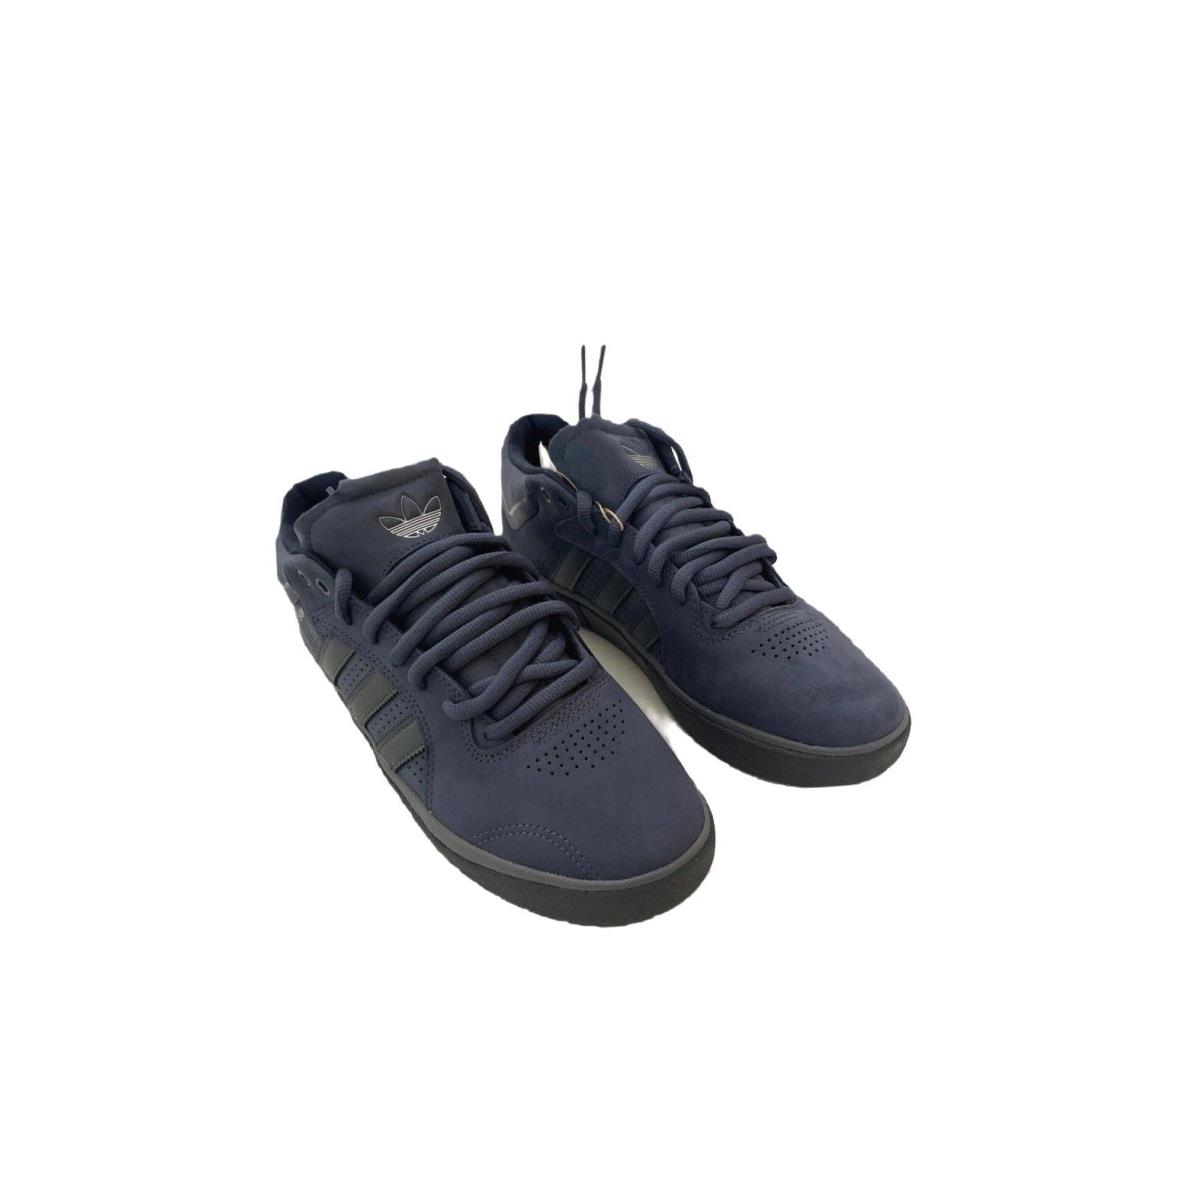 Adidas Men`s Tyshawn Skateboarding/casual Shoes - Shadow Navy/Carbon/Legend Ink